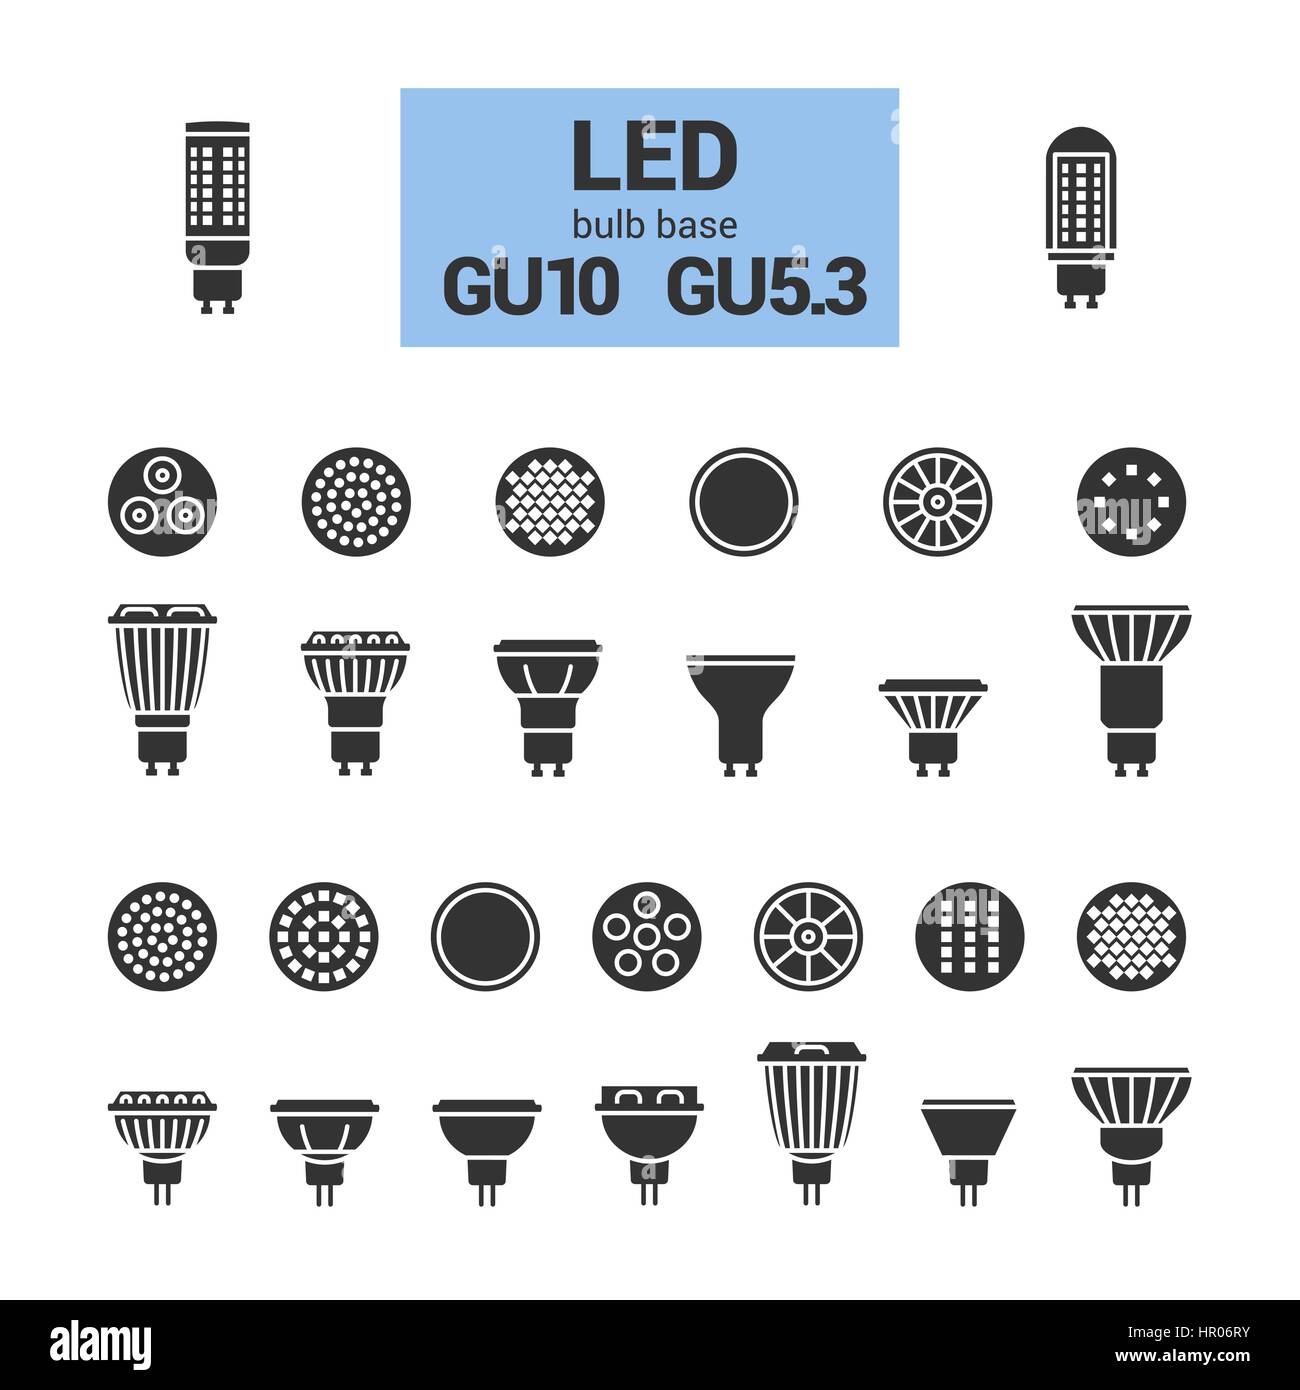 LED light bulbs with GU10 and GU5.3 base, vector silhouette icon set on white background Stock Vector